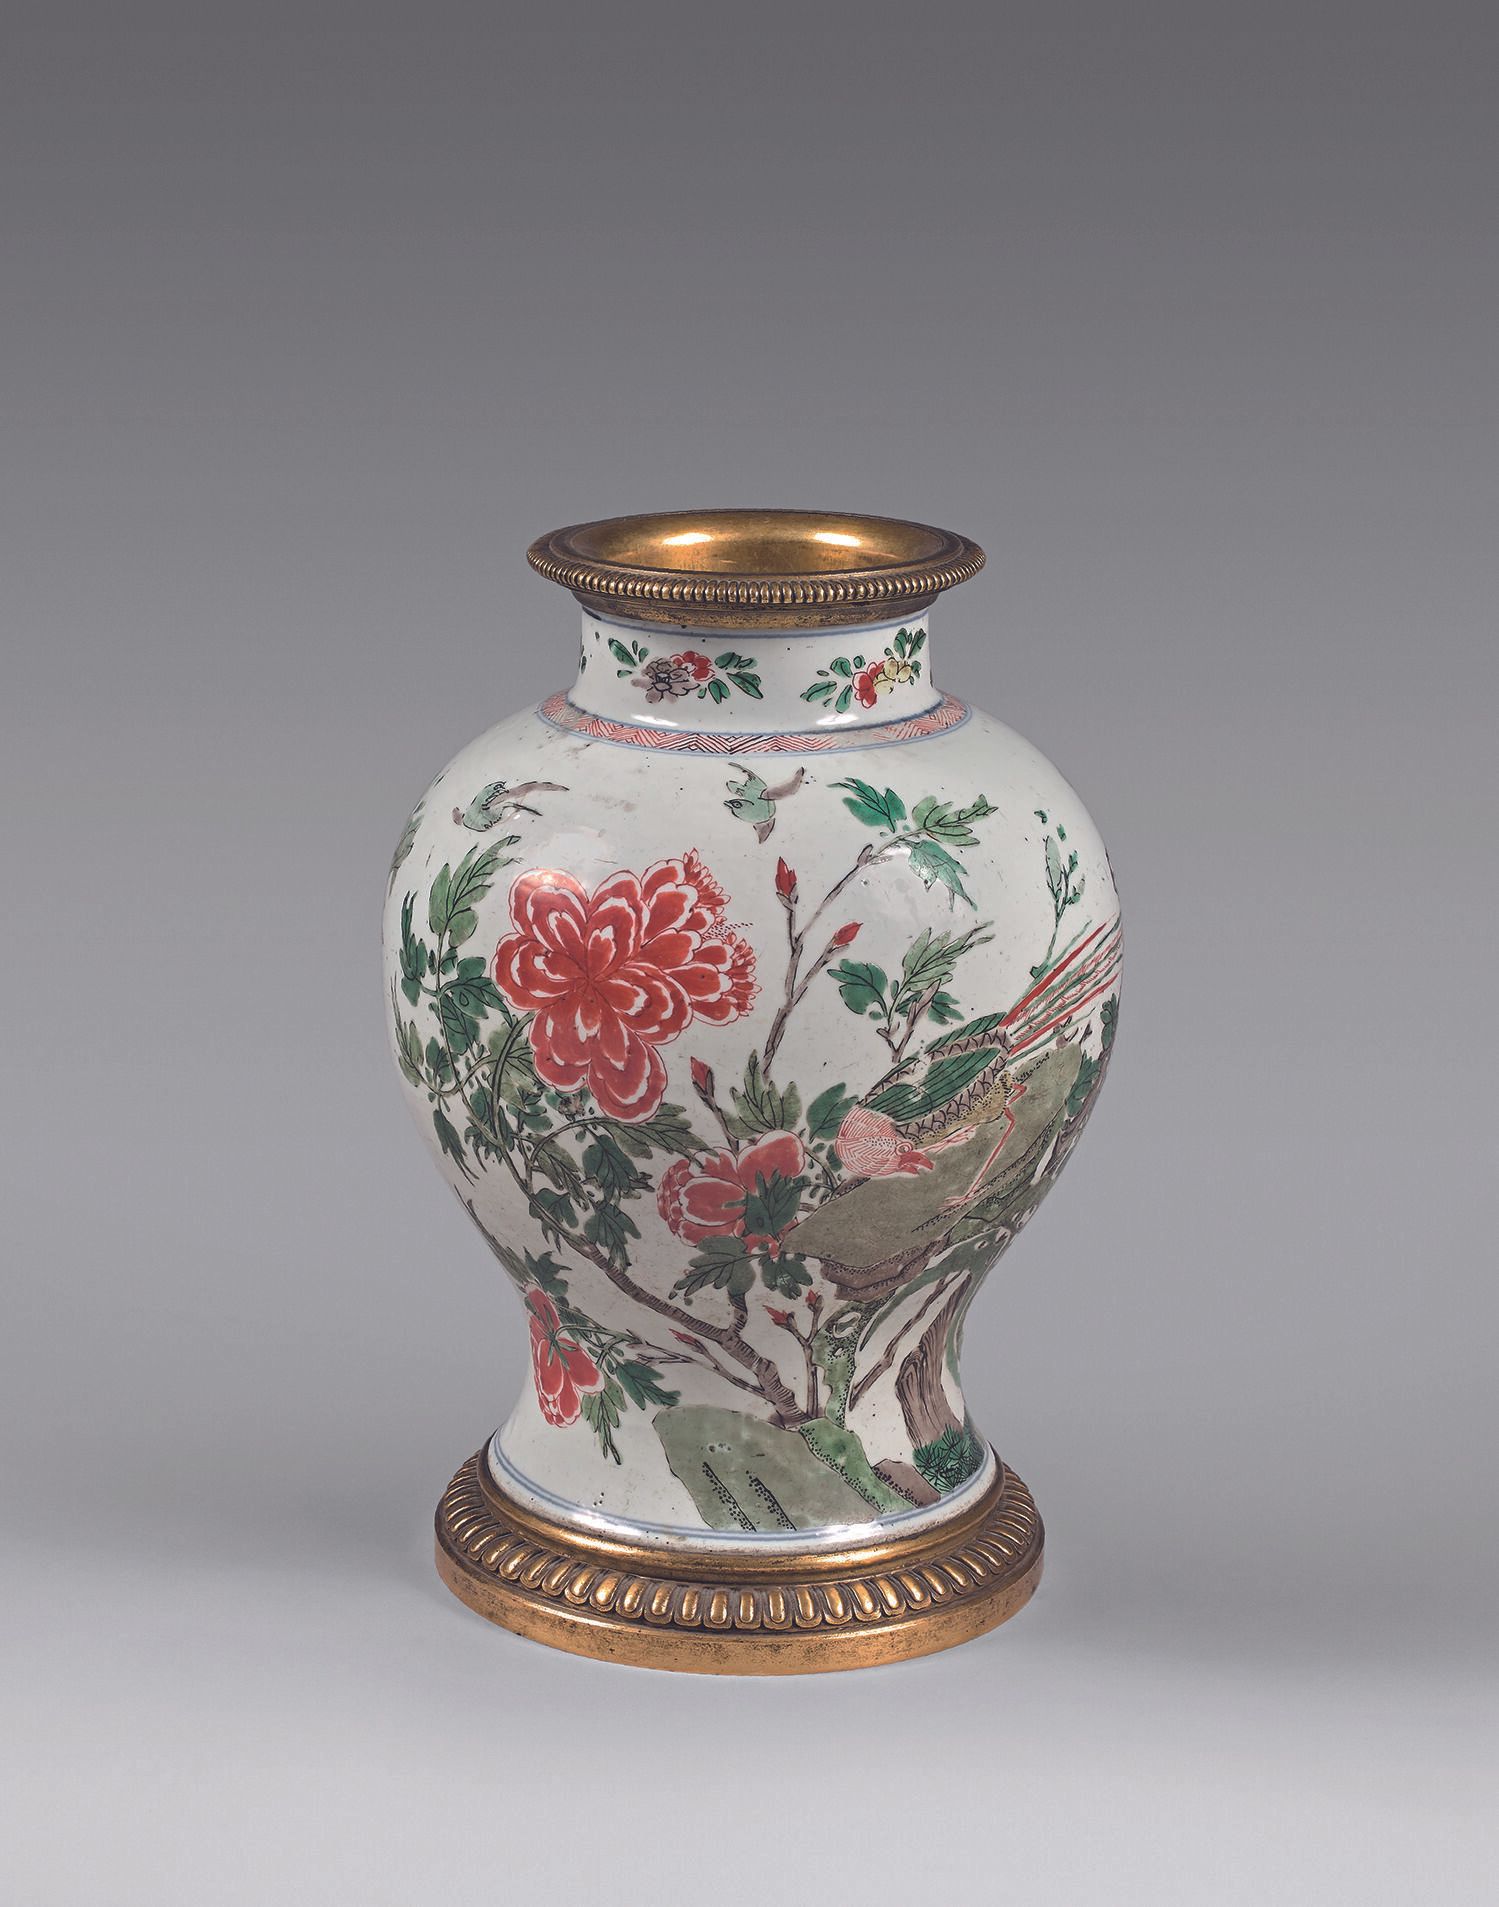 Null CHINA
Porcelain jar with polychrome decoration on a background of shrubs of&hellip;